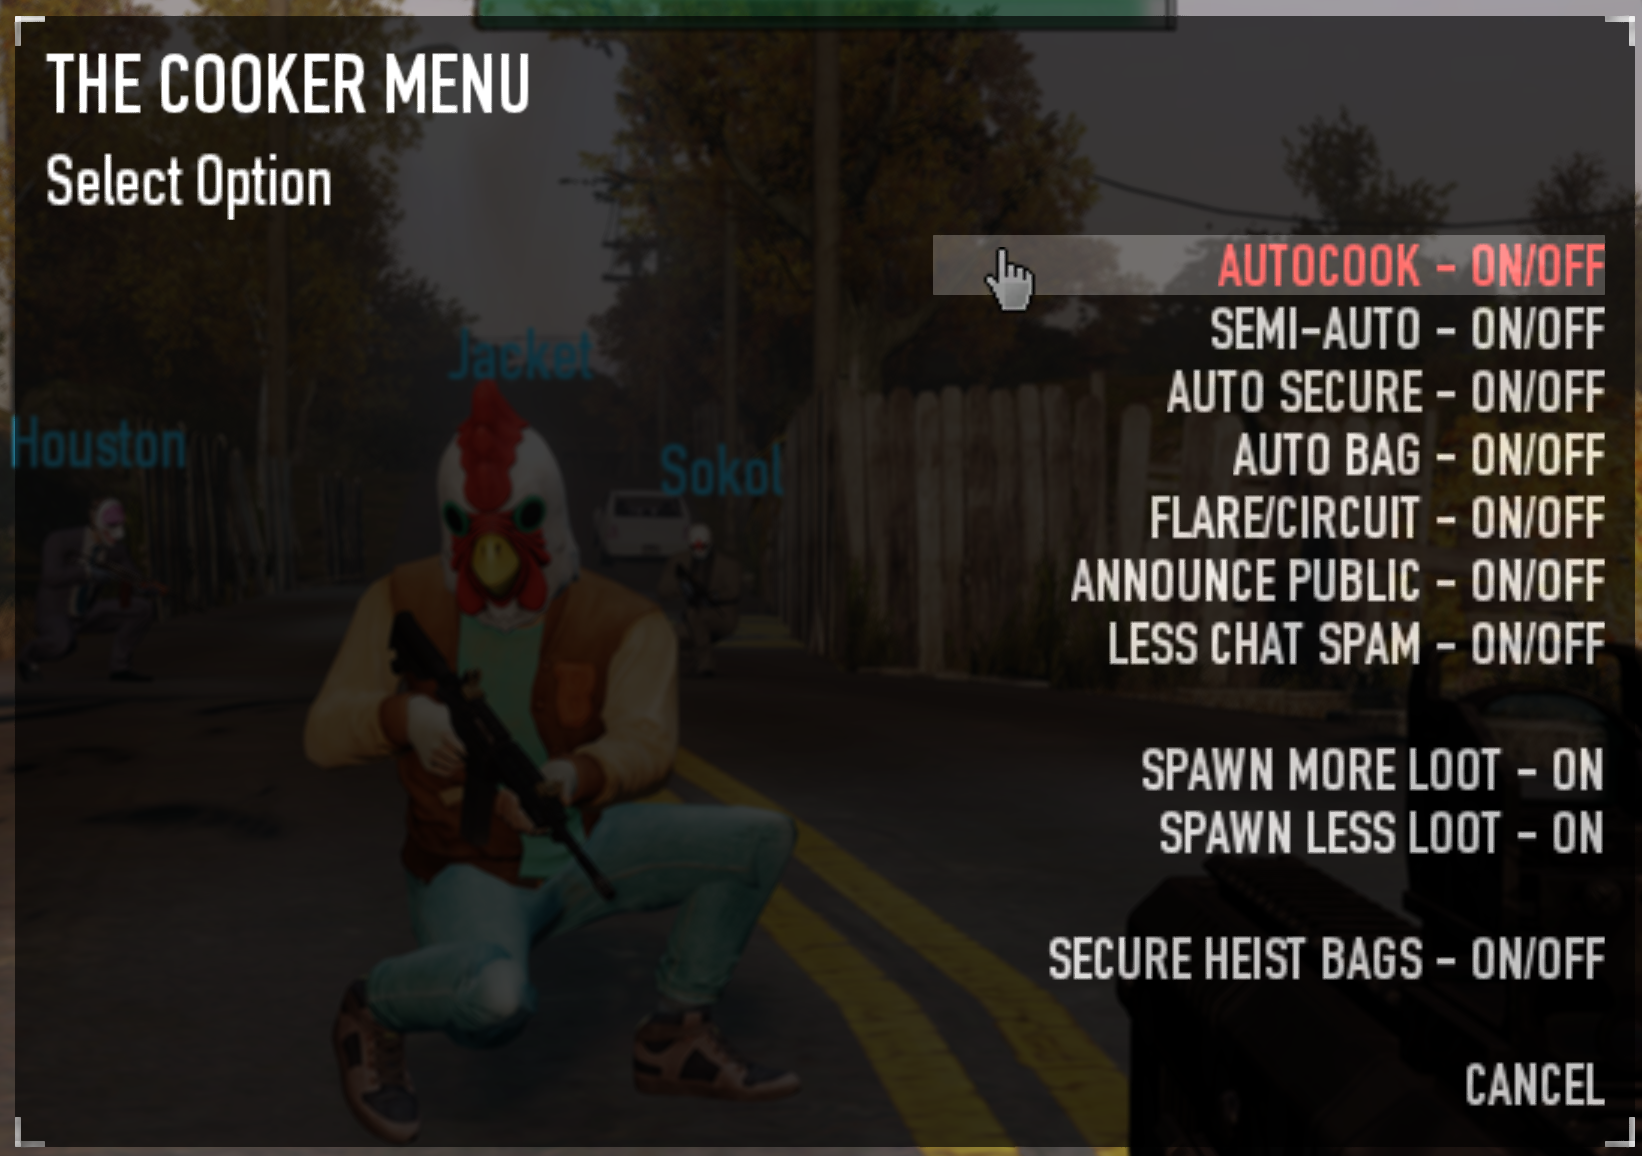 Payday 3 Unlimited XP Farrm Bug: Unlock All Weapon Mods 